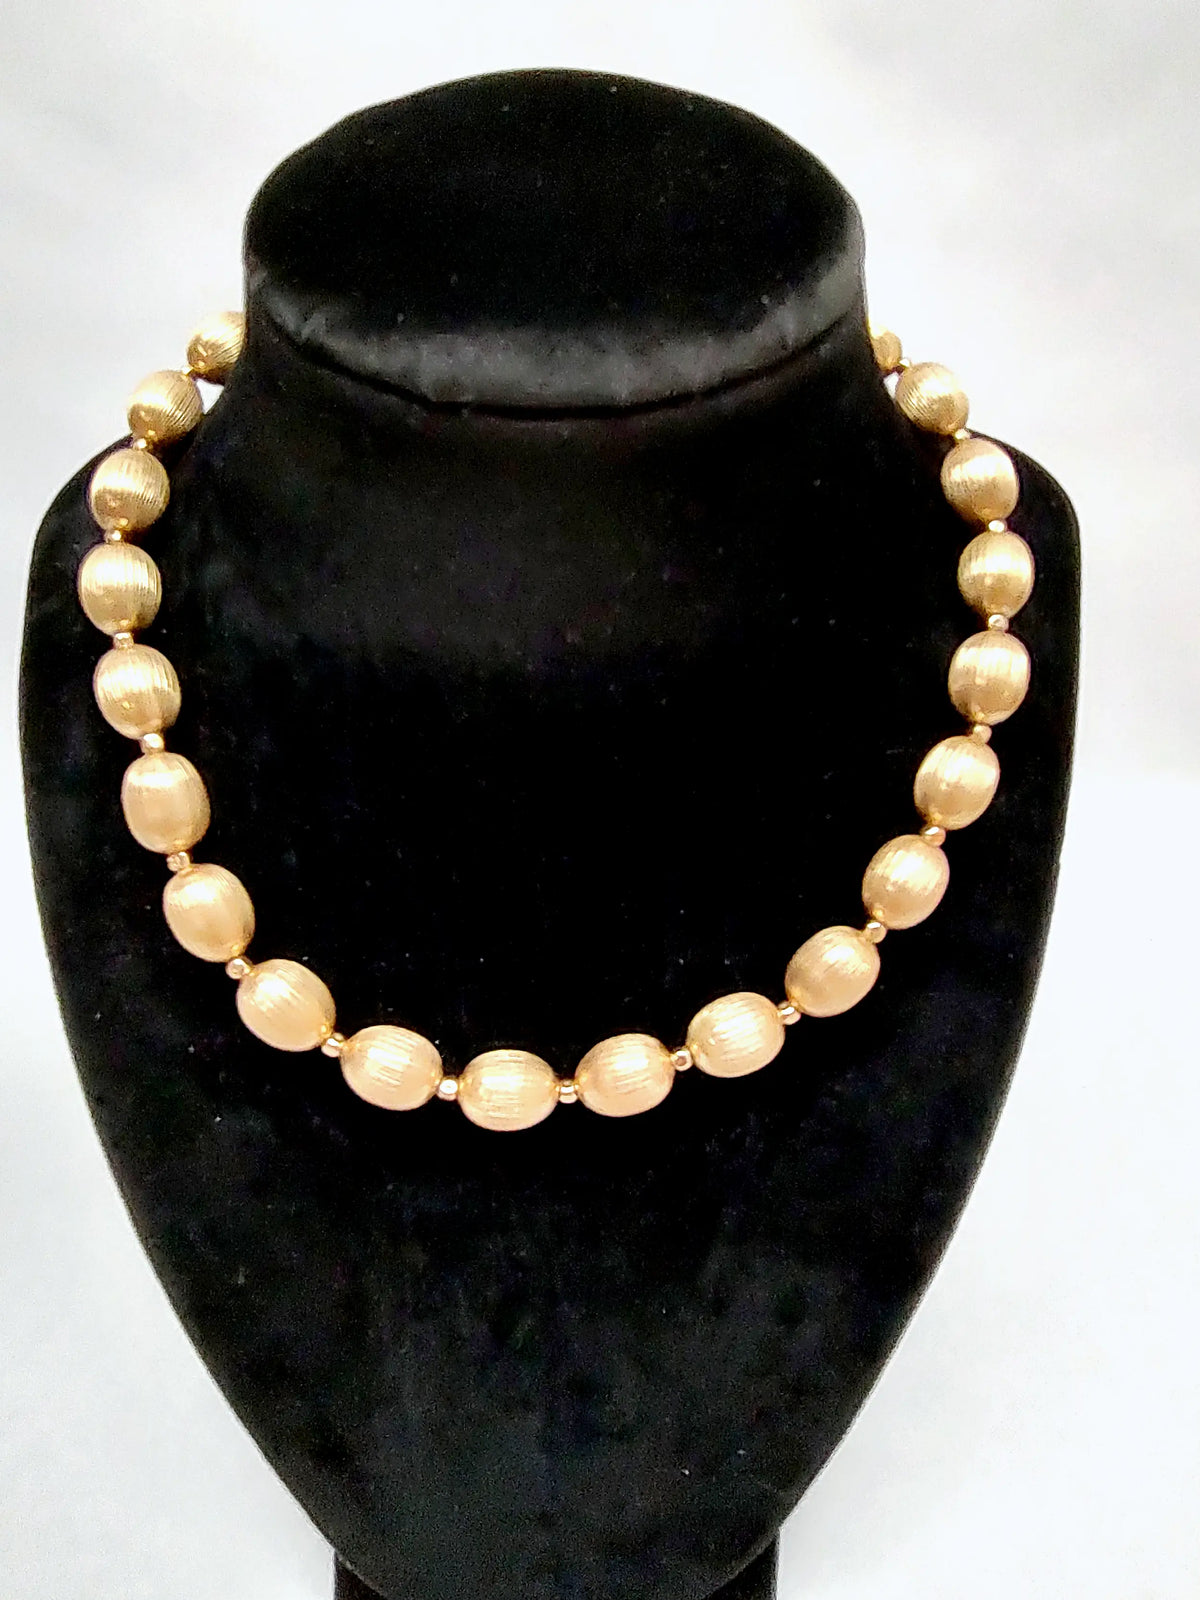 Vintage Trifari Brushed Gold Tone Beaded Necklace | USA - Hers and His Treasures